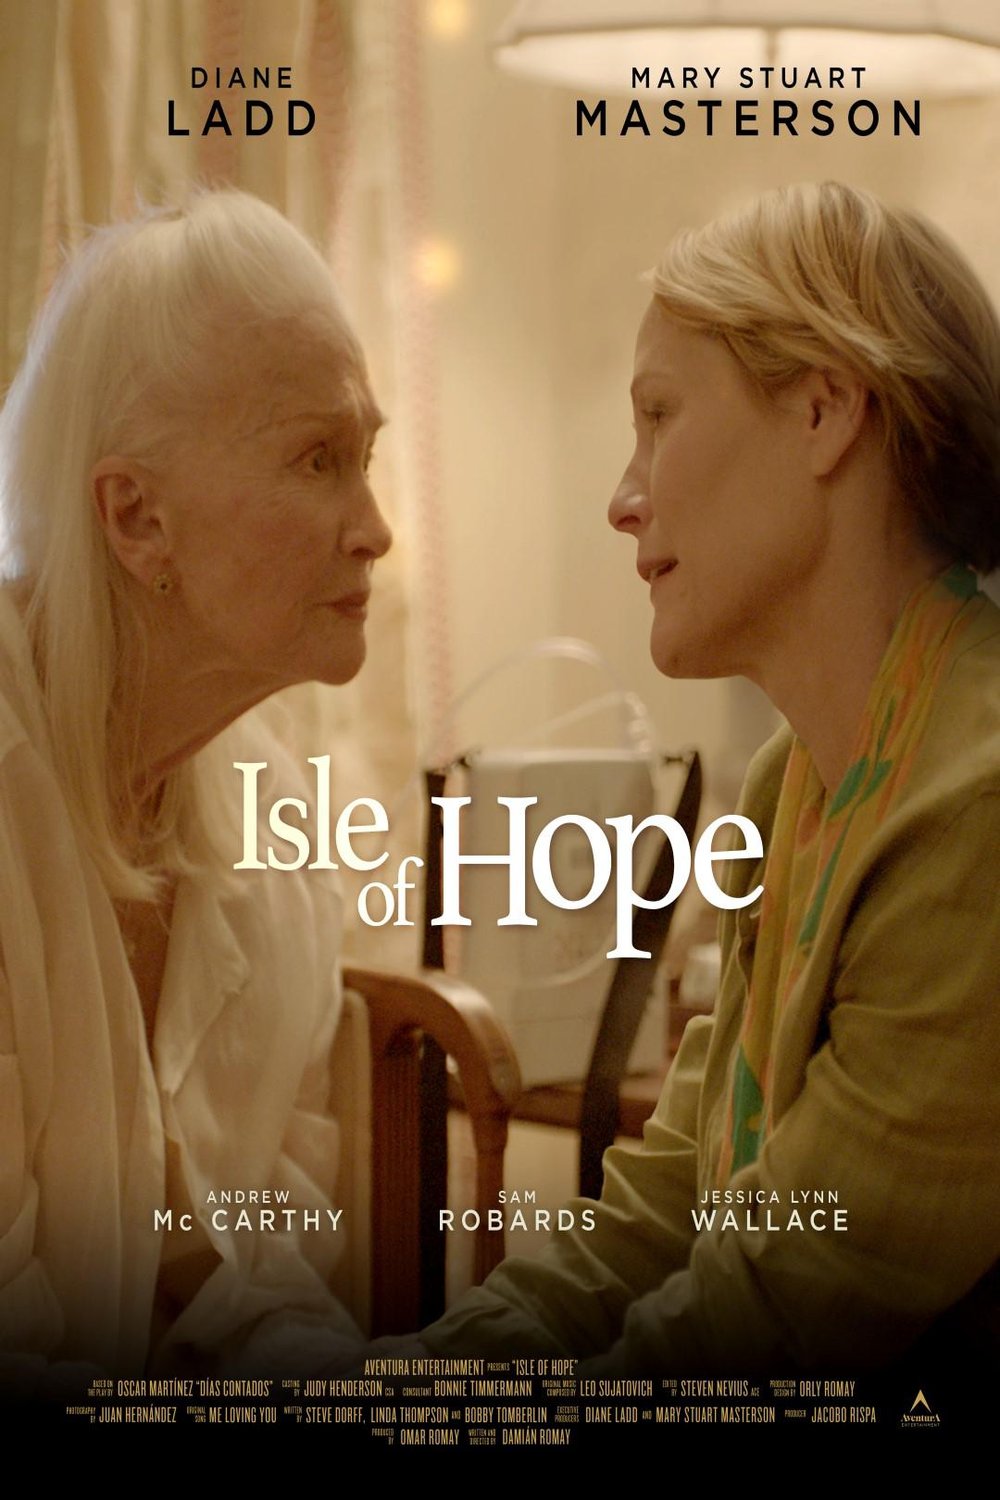 Poster of the movie Isle of Hope